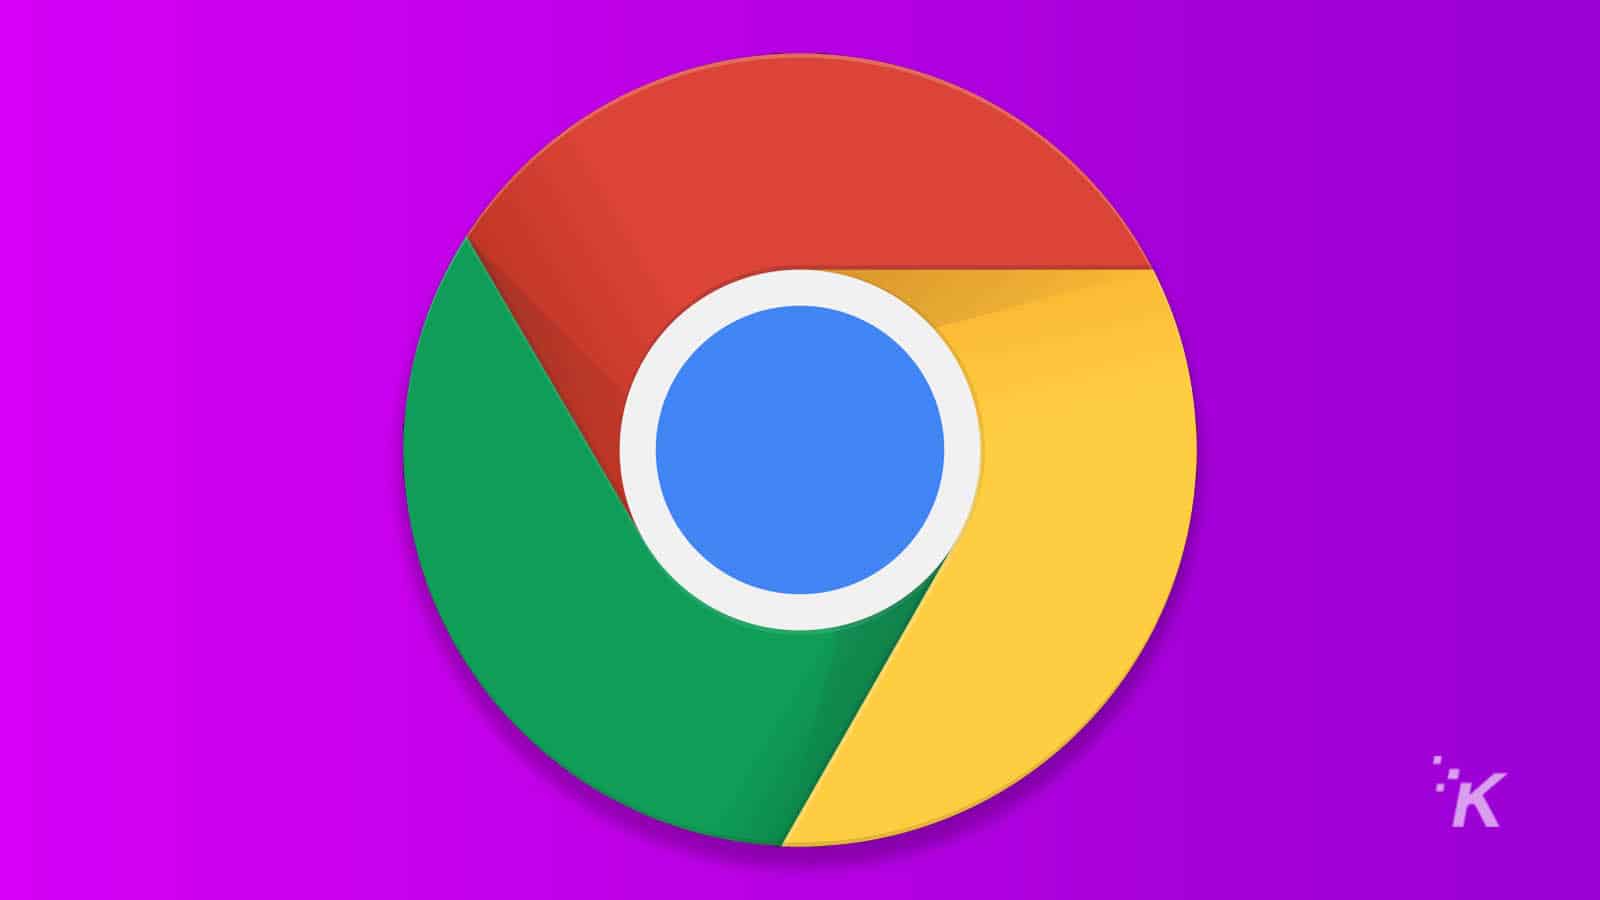 A ton of Chrome extensions were exposed for injecting ads in search results